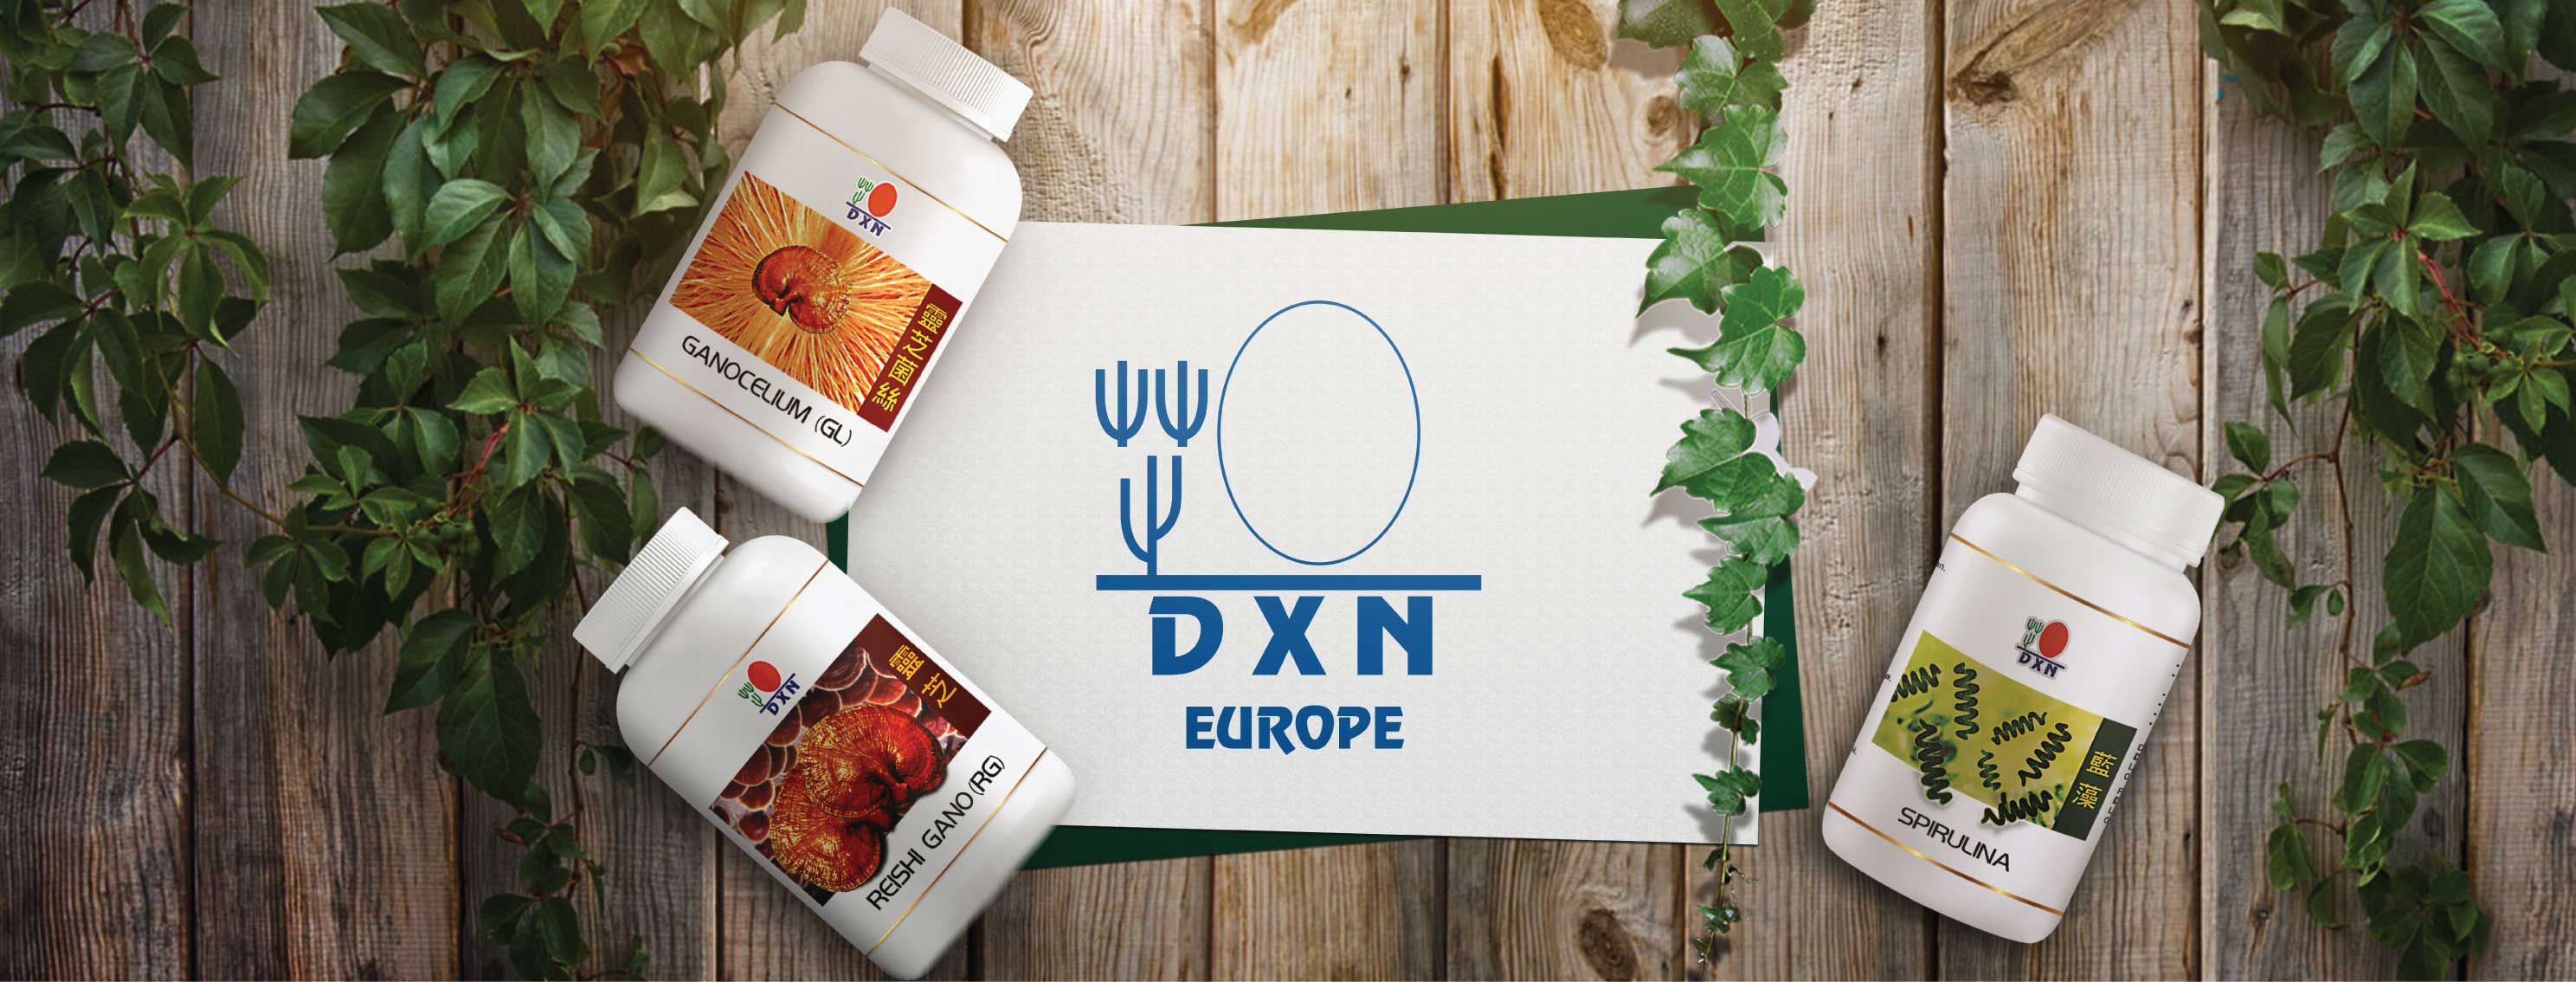 Dxn Europe Official Site